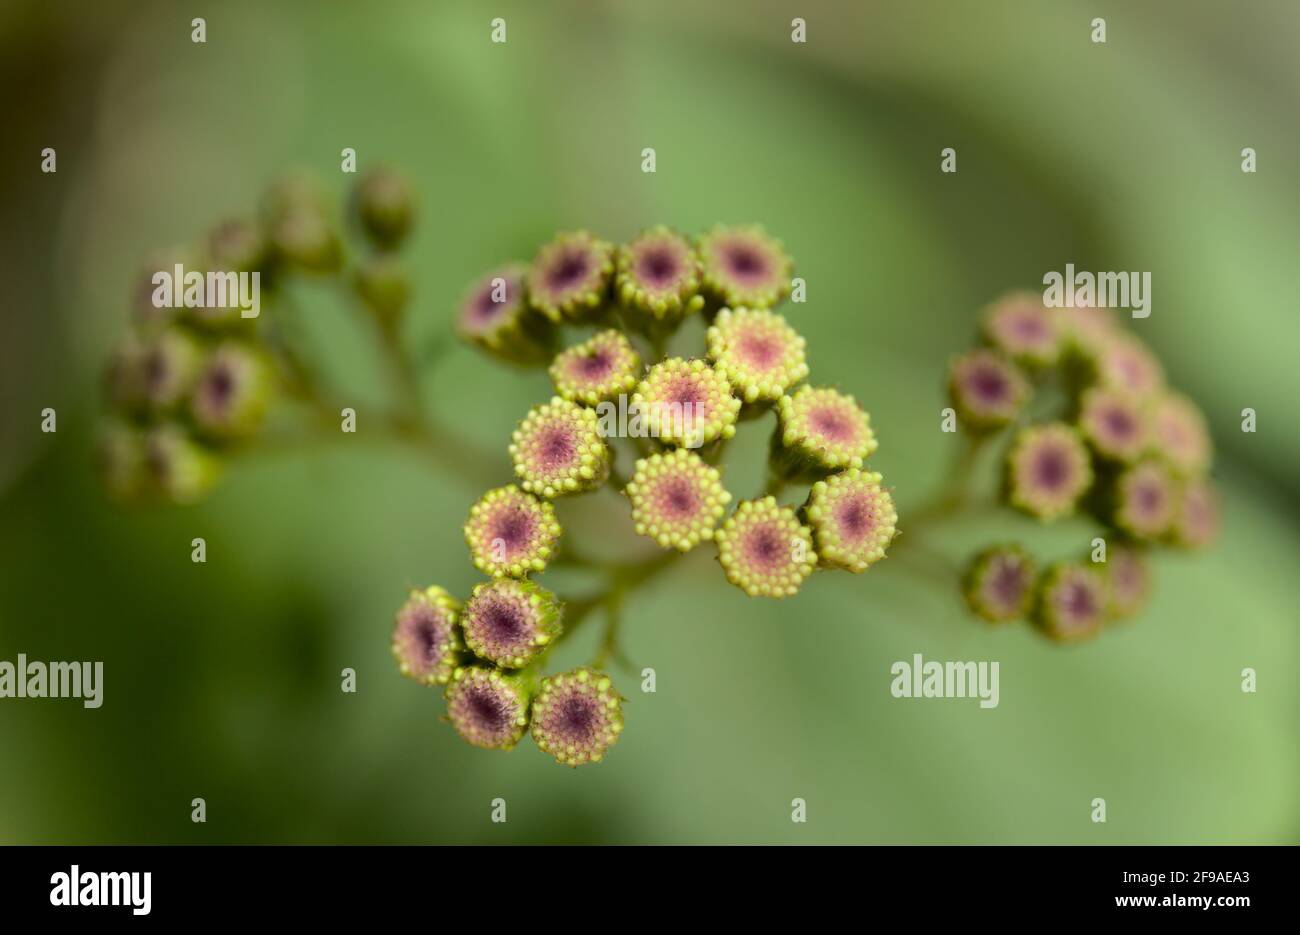 Flora of Gran Canaria -  Ageratina adenophora, Crofton weed invasive plant natural macro floral background Stock Photo